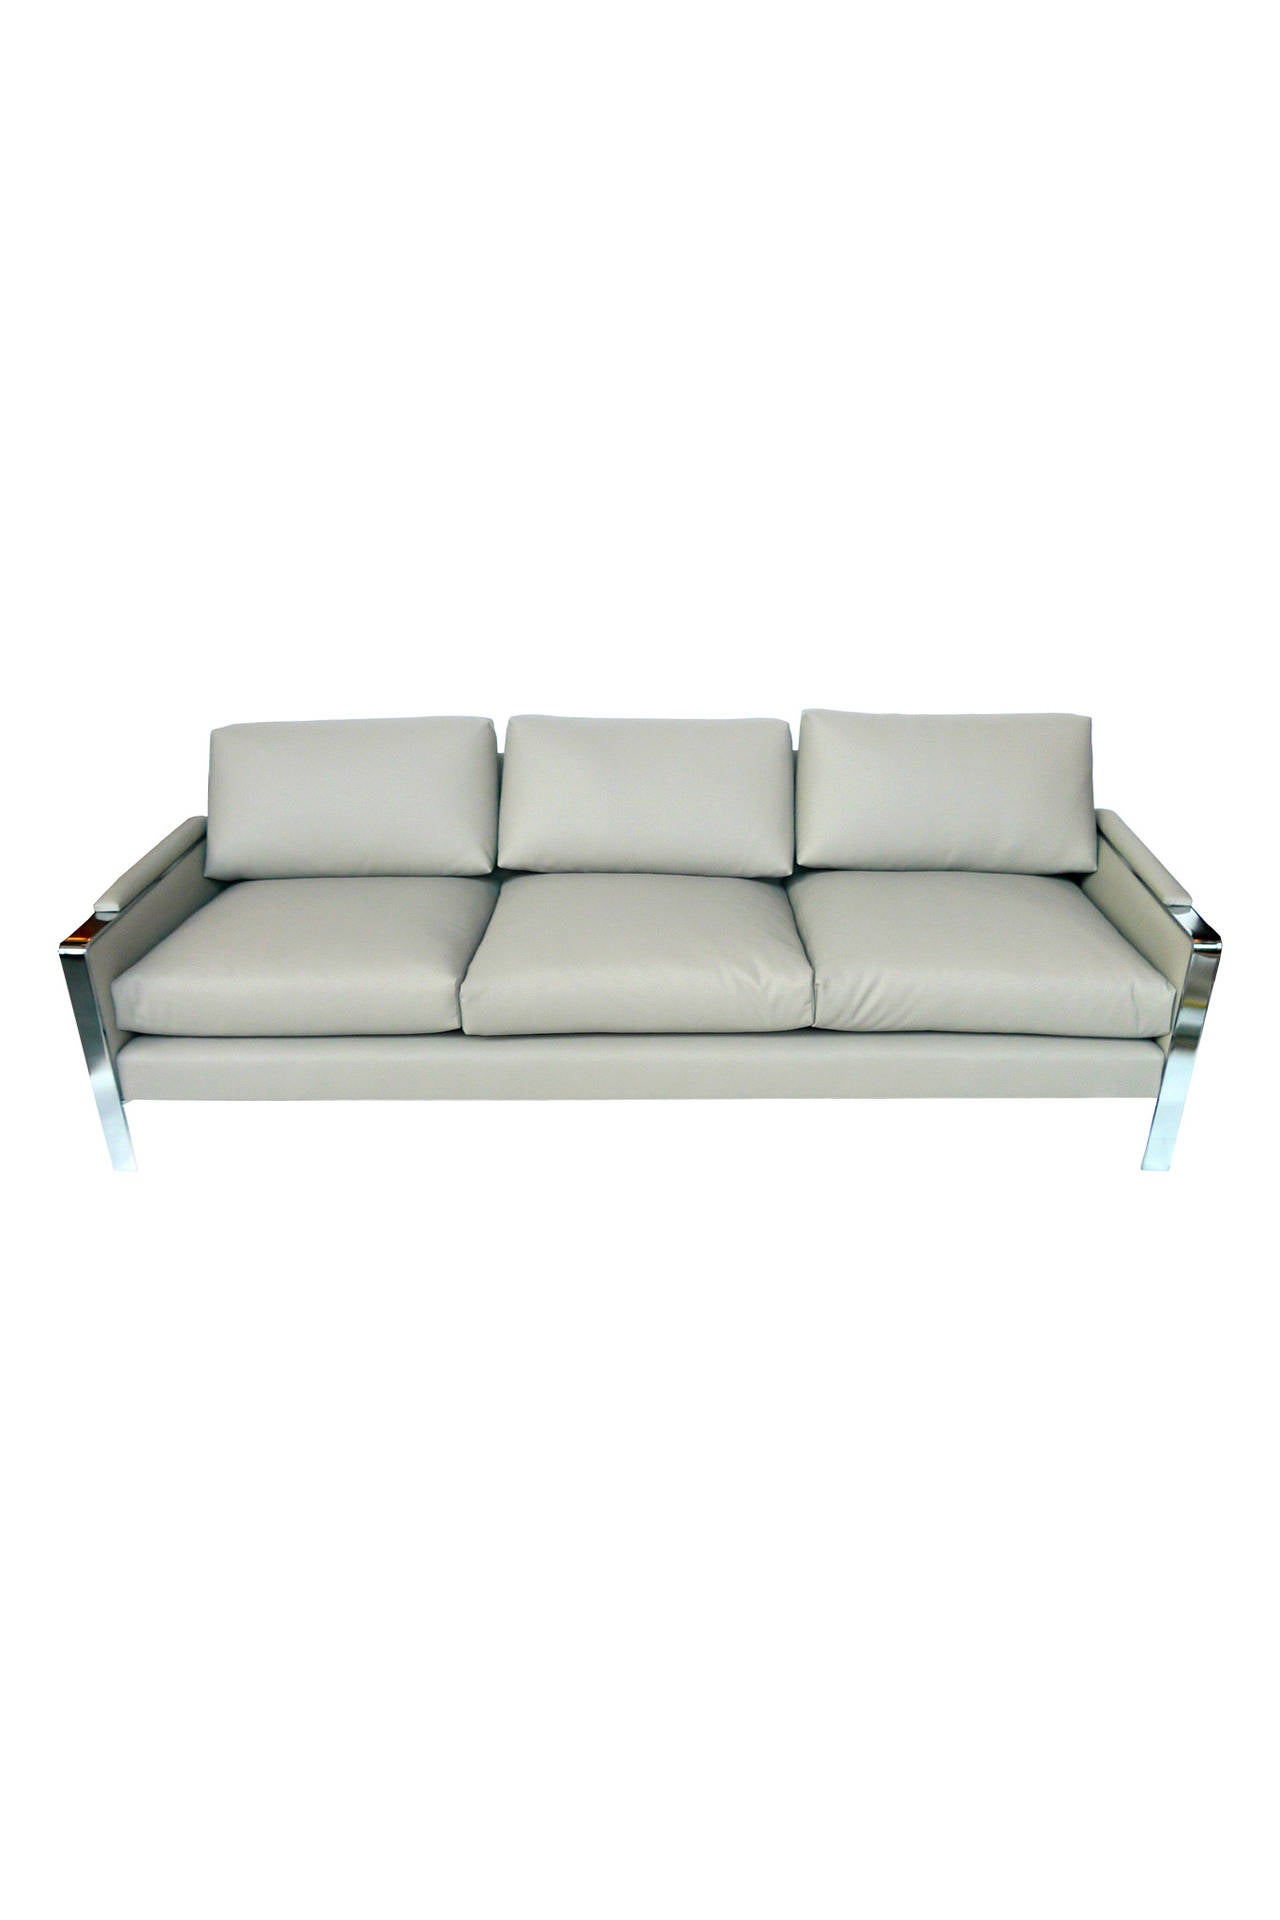 This Milo Baughman single sofa is newly reupholstered in a warm gray supple vinyl. It has a well-tailored look and exemplifies Baughman's modernist design with its clean lines and edges. The base and arms are chrome with matching vinyl cushioned